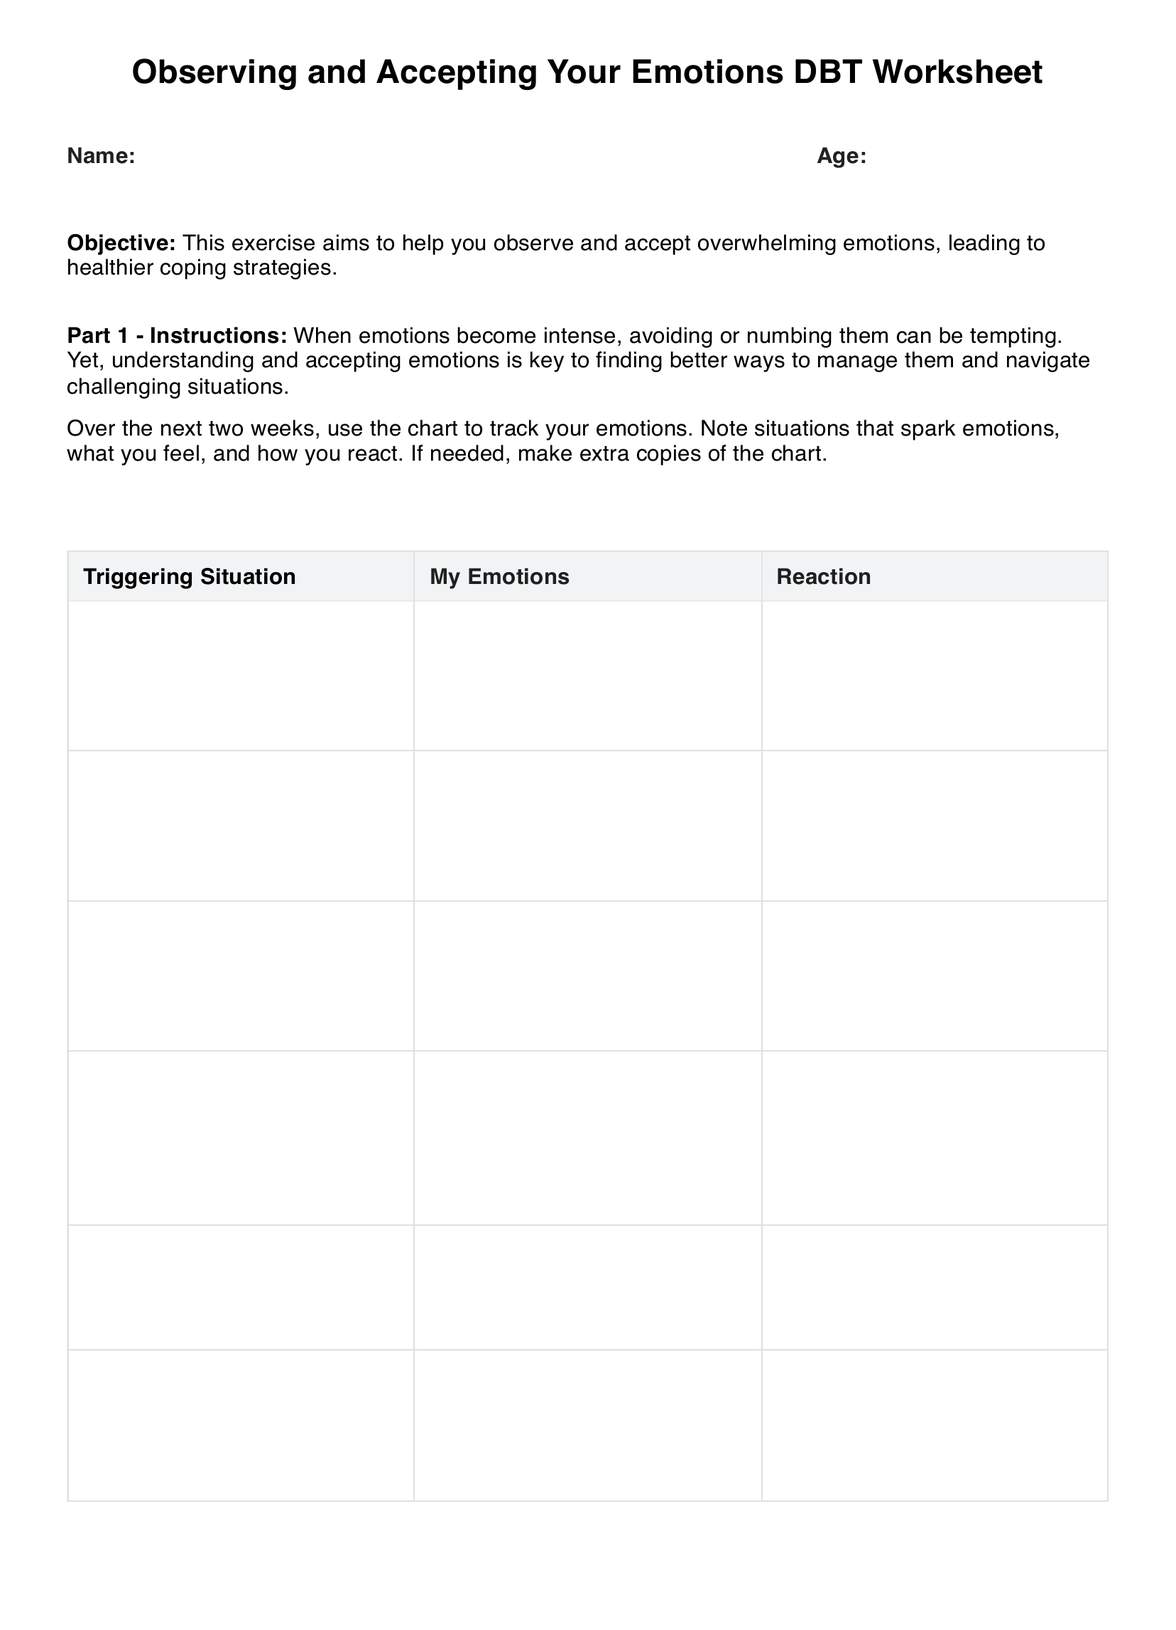 Observing and Accepting Your Emotions DBT Worksheet PDF Example